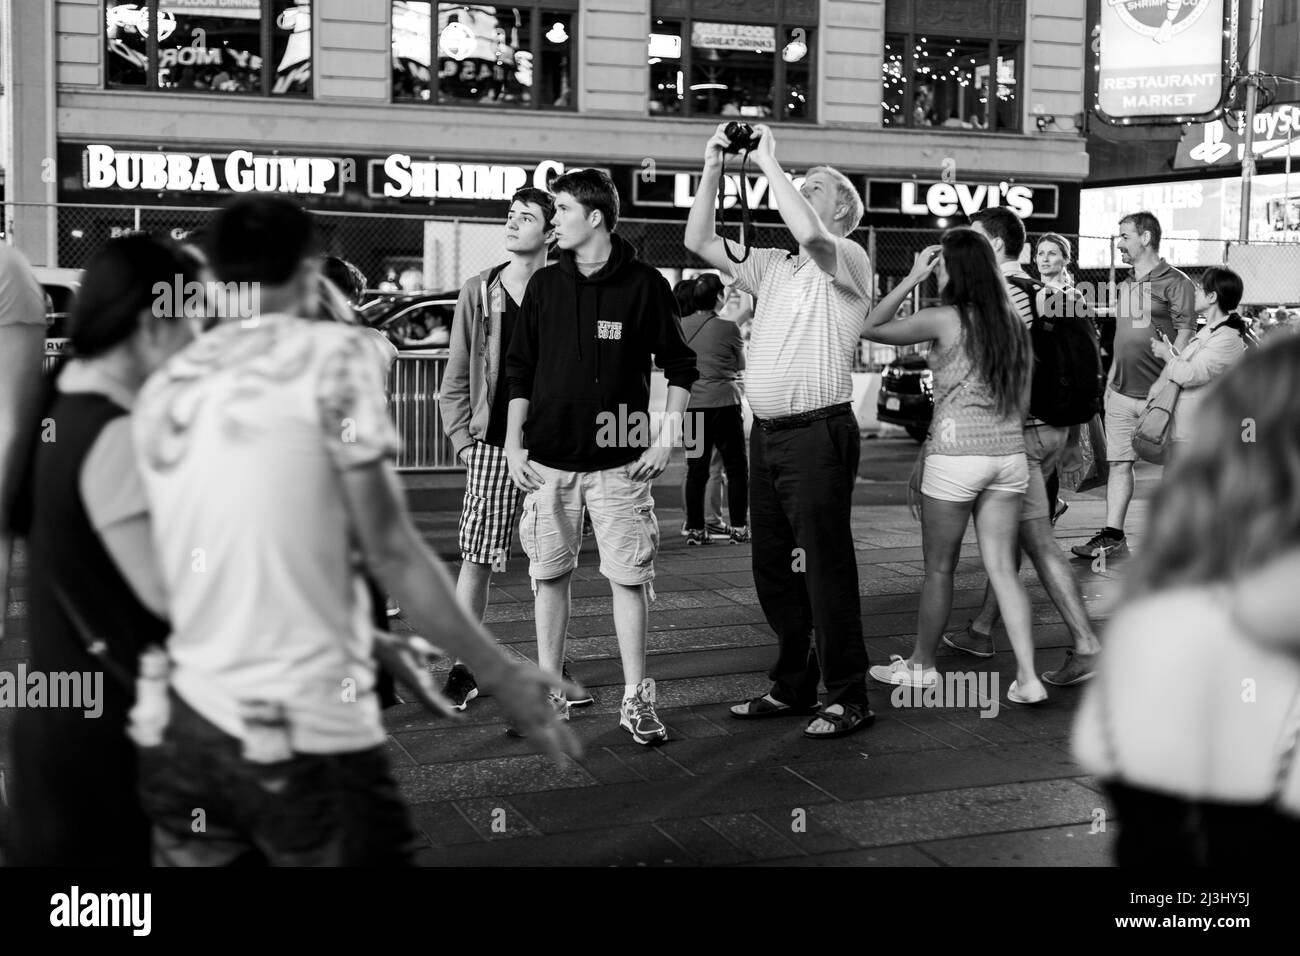 Theater District, New York City, NY, USA, Lots of people on the street at night on times square Stock Photo